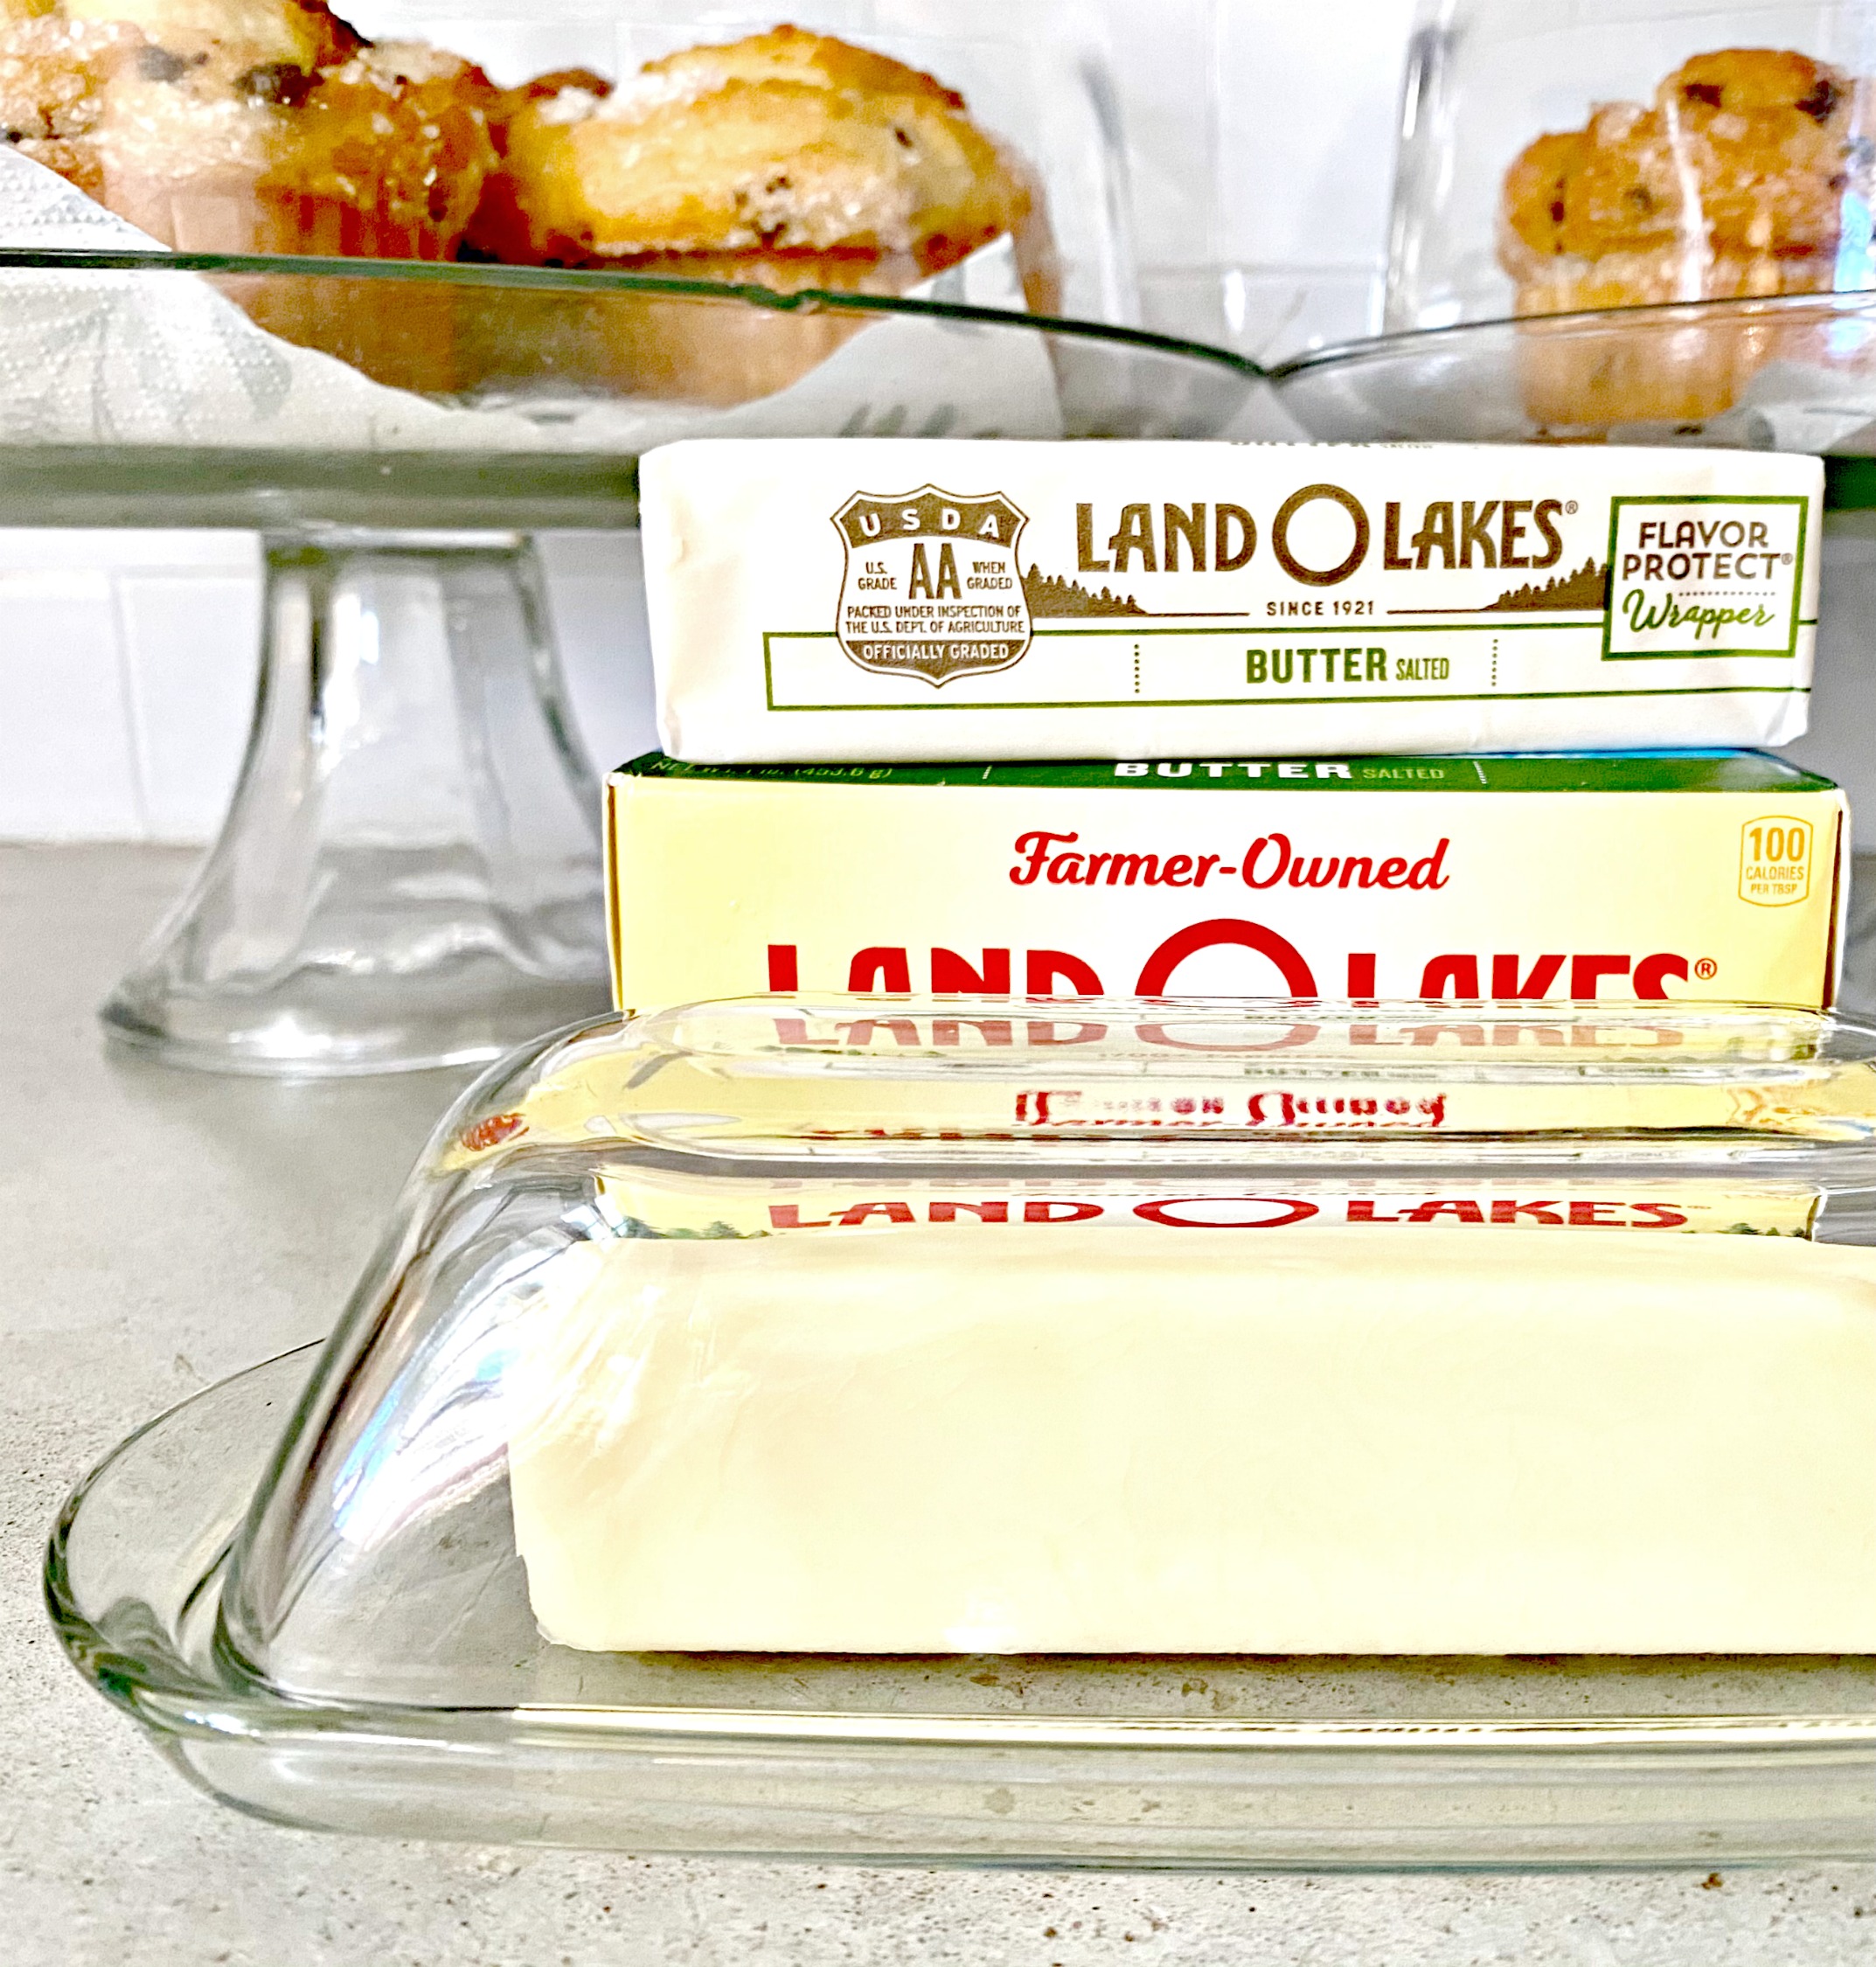 can butter be left out on the counter?